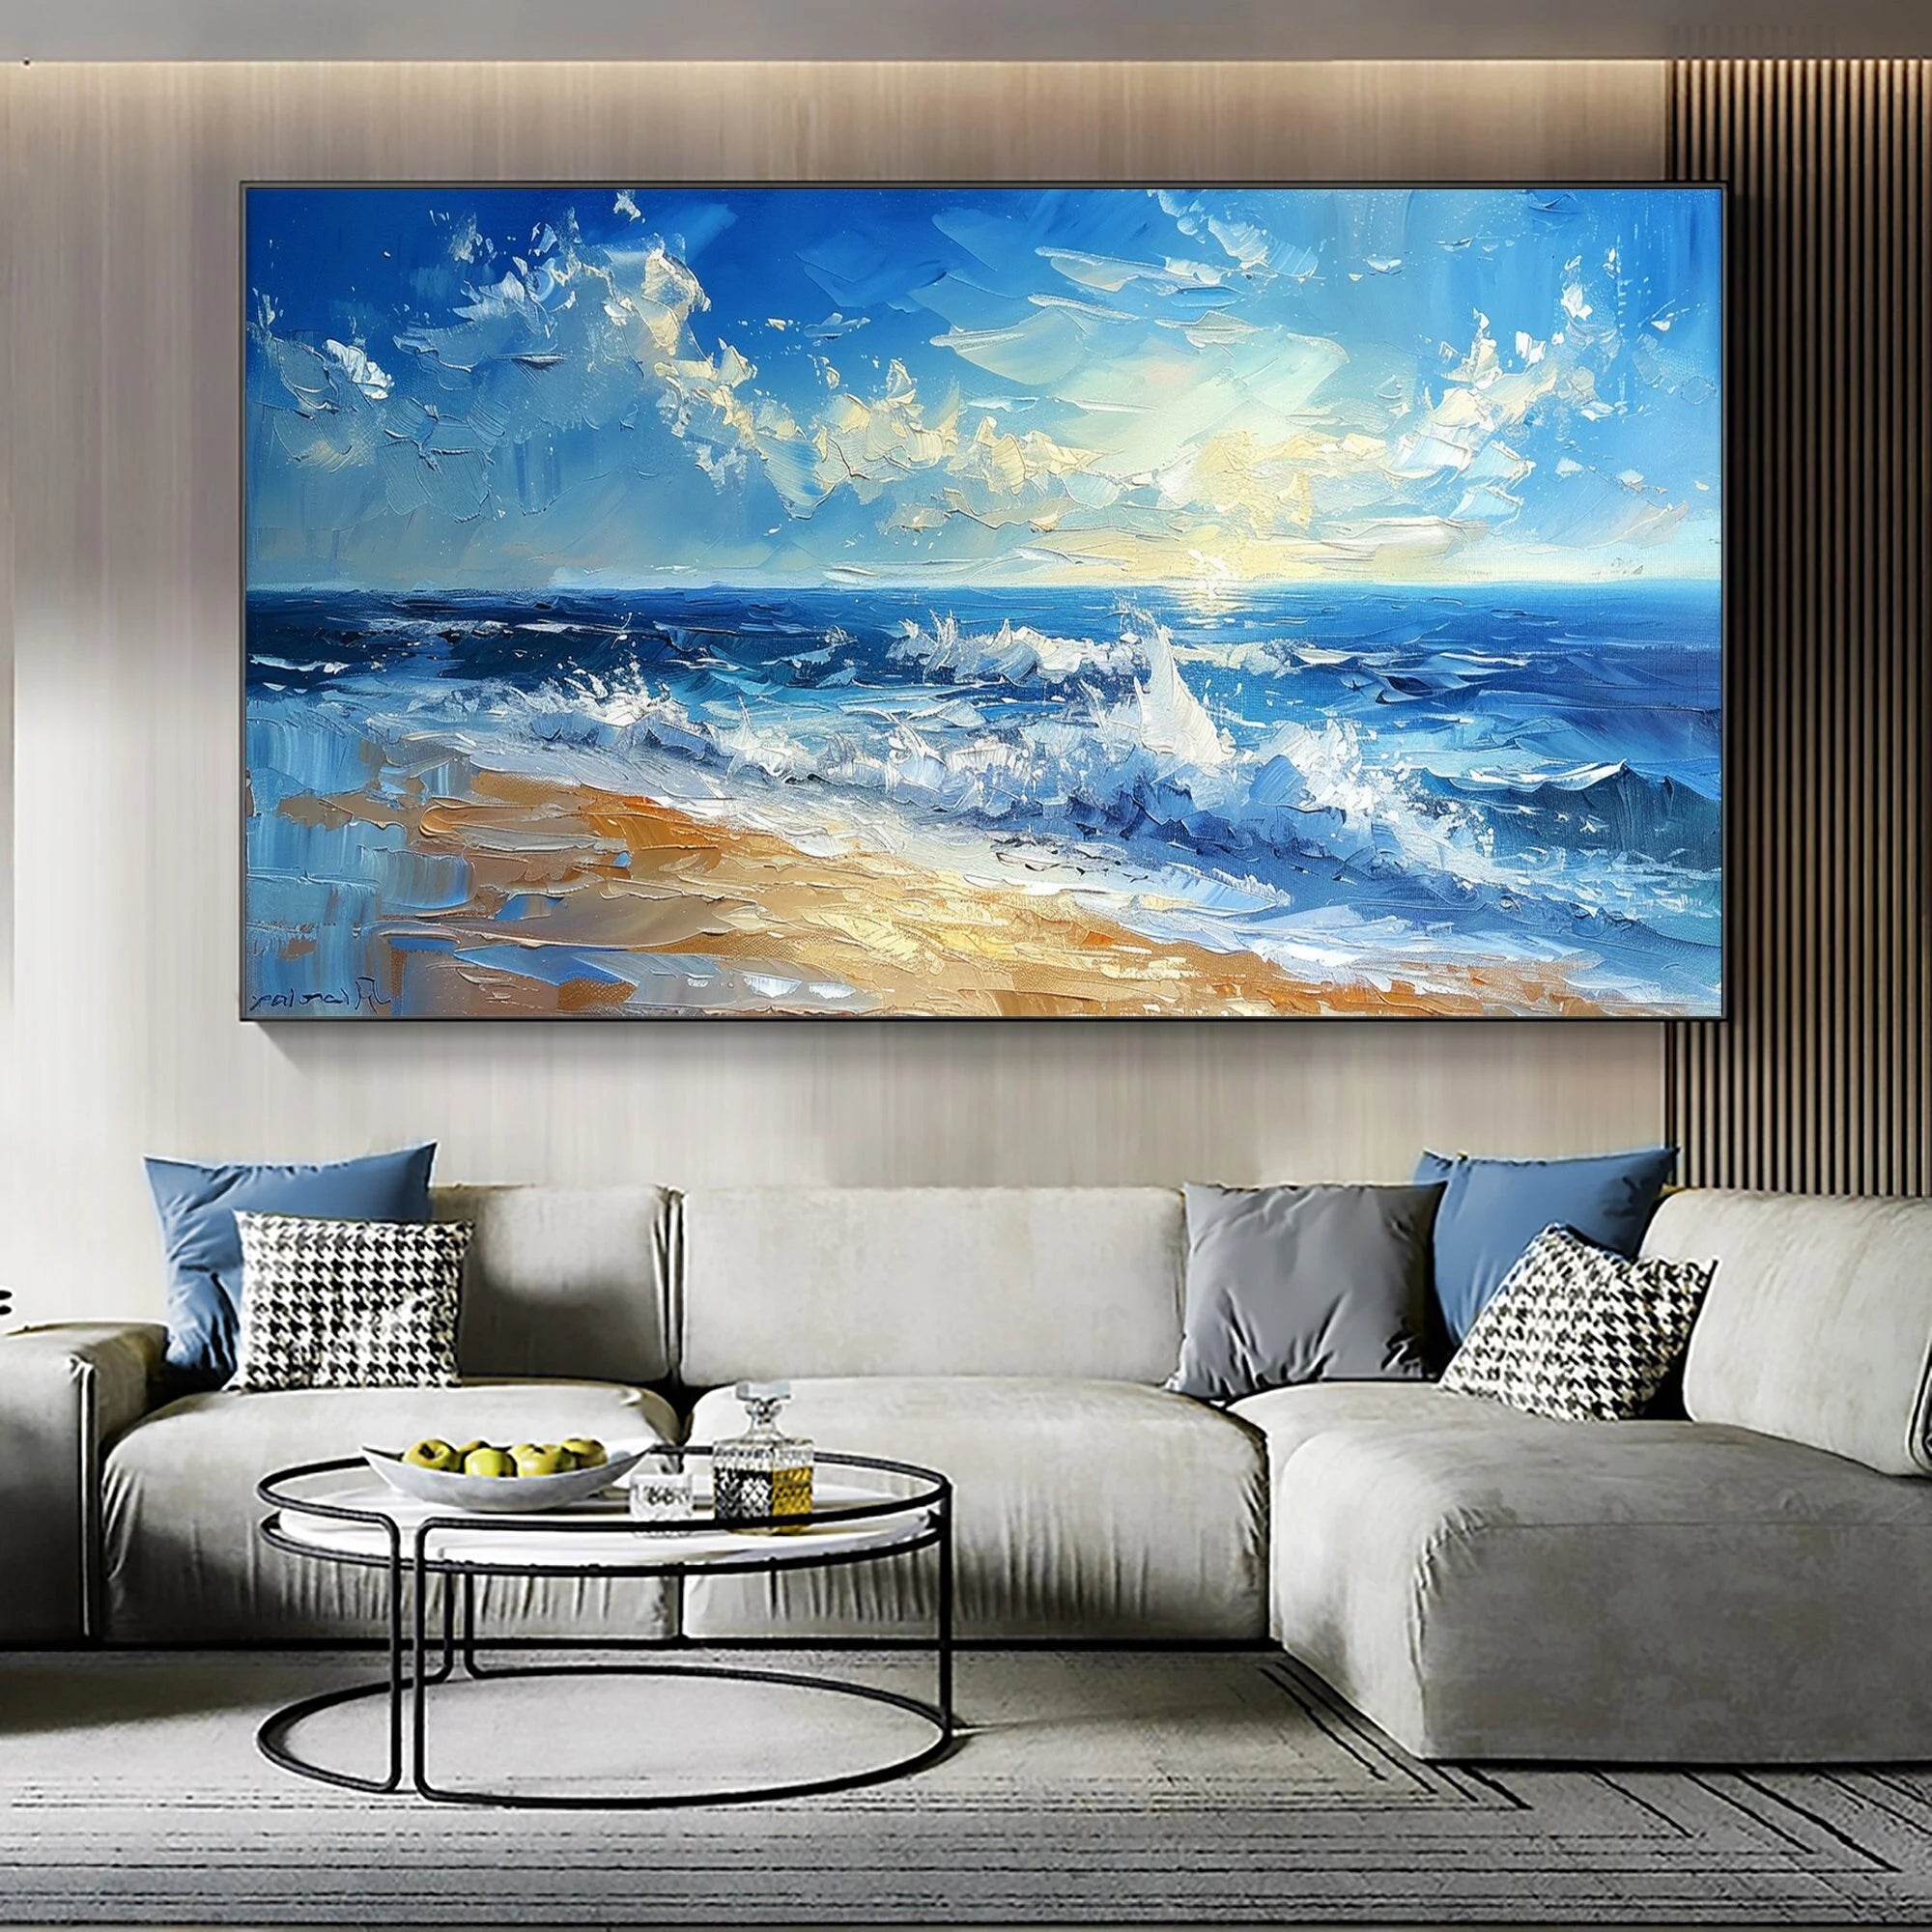 Azure Ambiance: Harmonizing Home Interiors with Blue Hued Oil Paintings